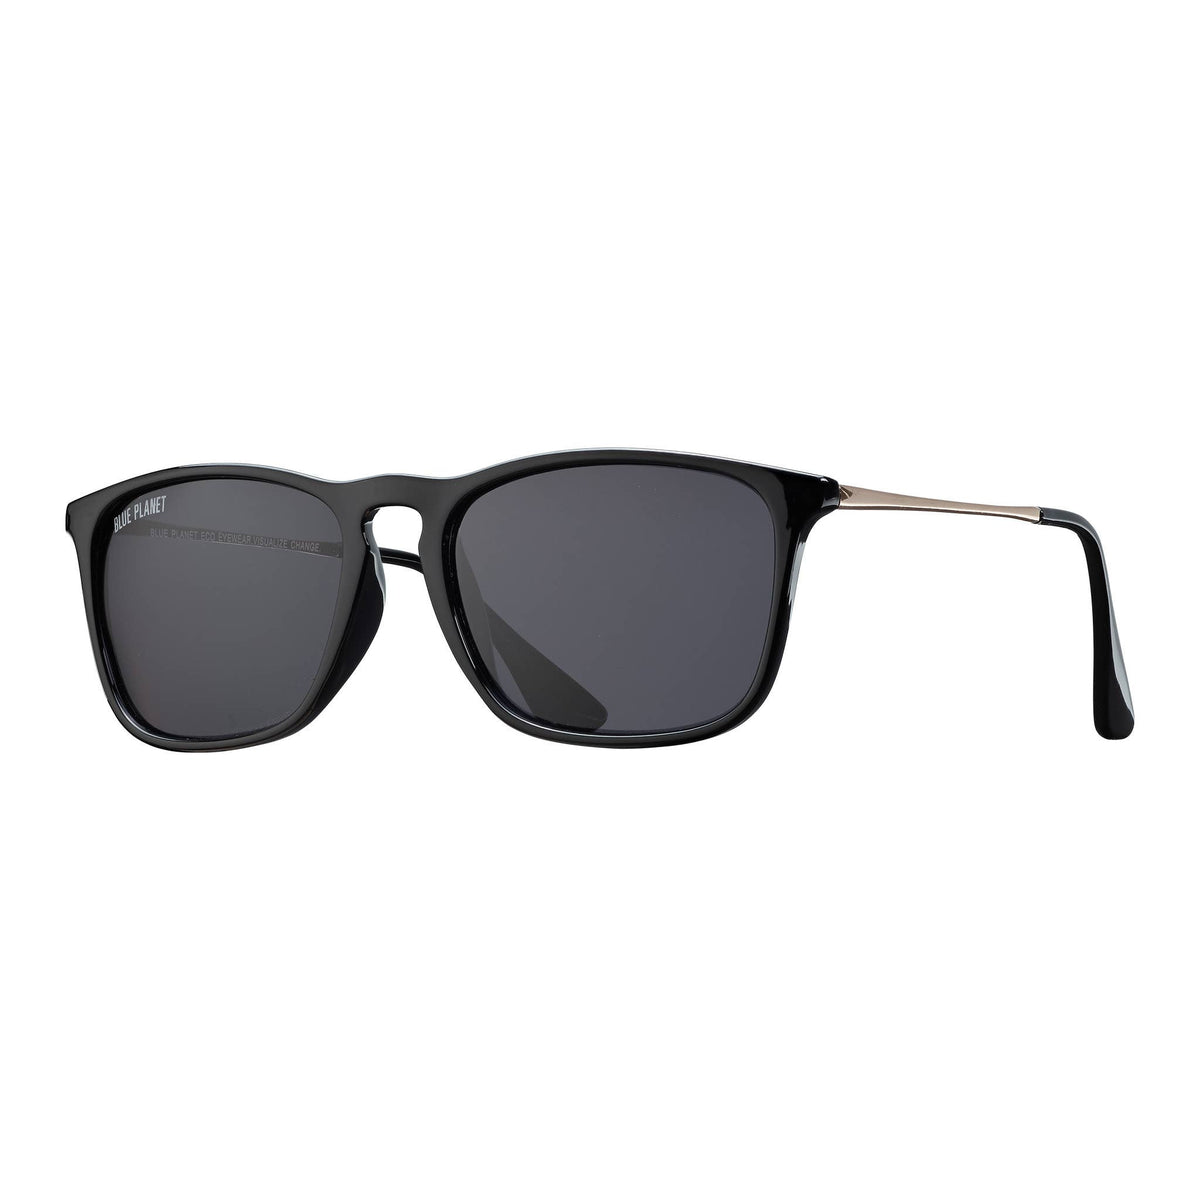 Kason Sunglasses in Onyx/Gold with Smoke Polarized Lens--Lemons and Limes Boutique